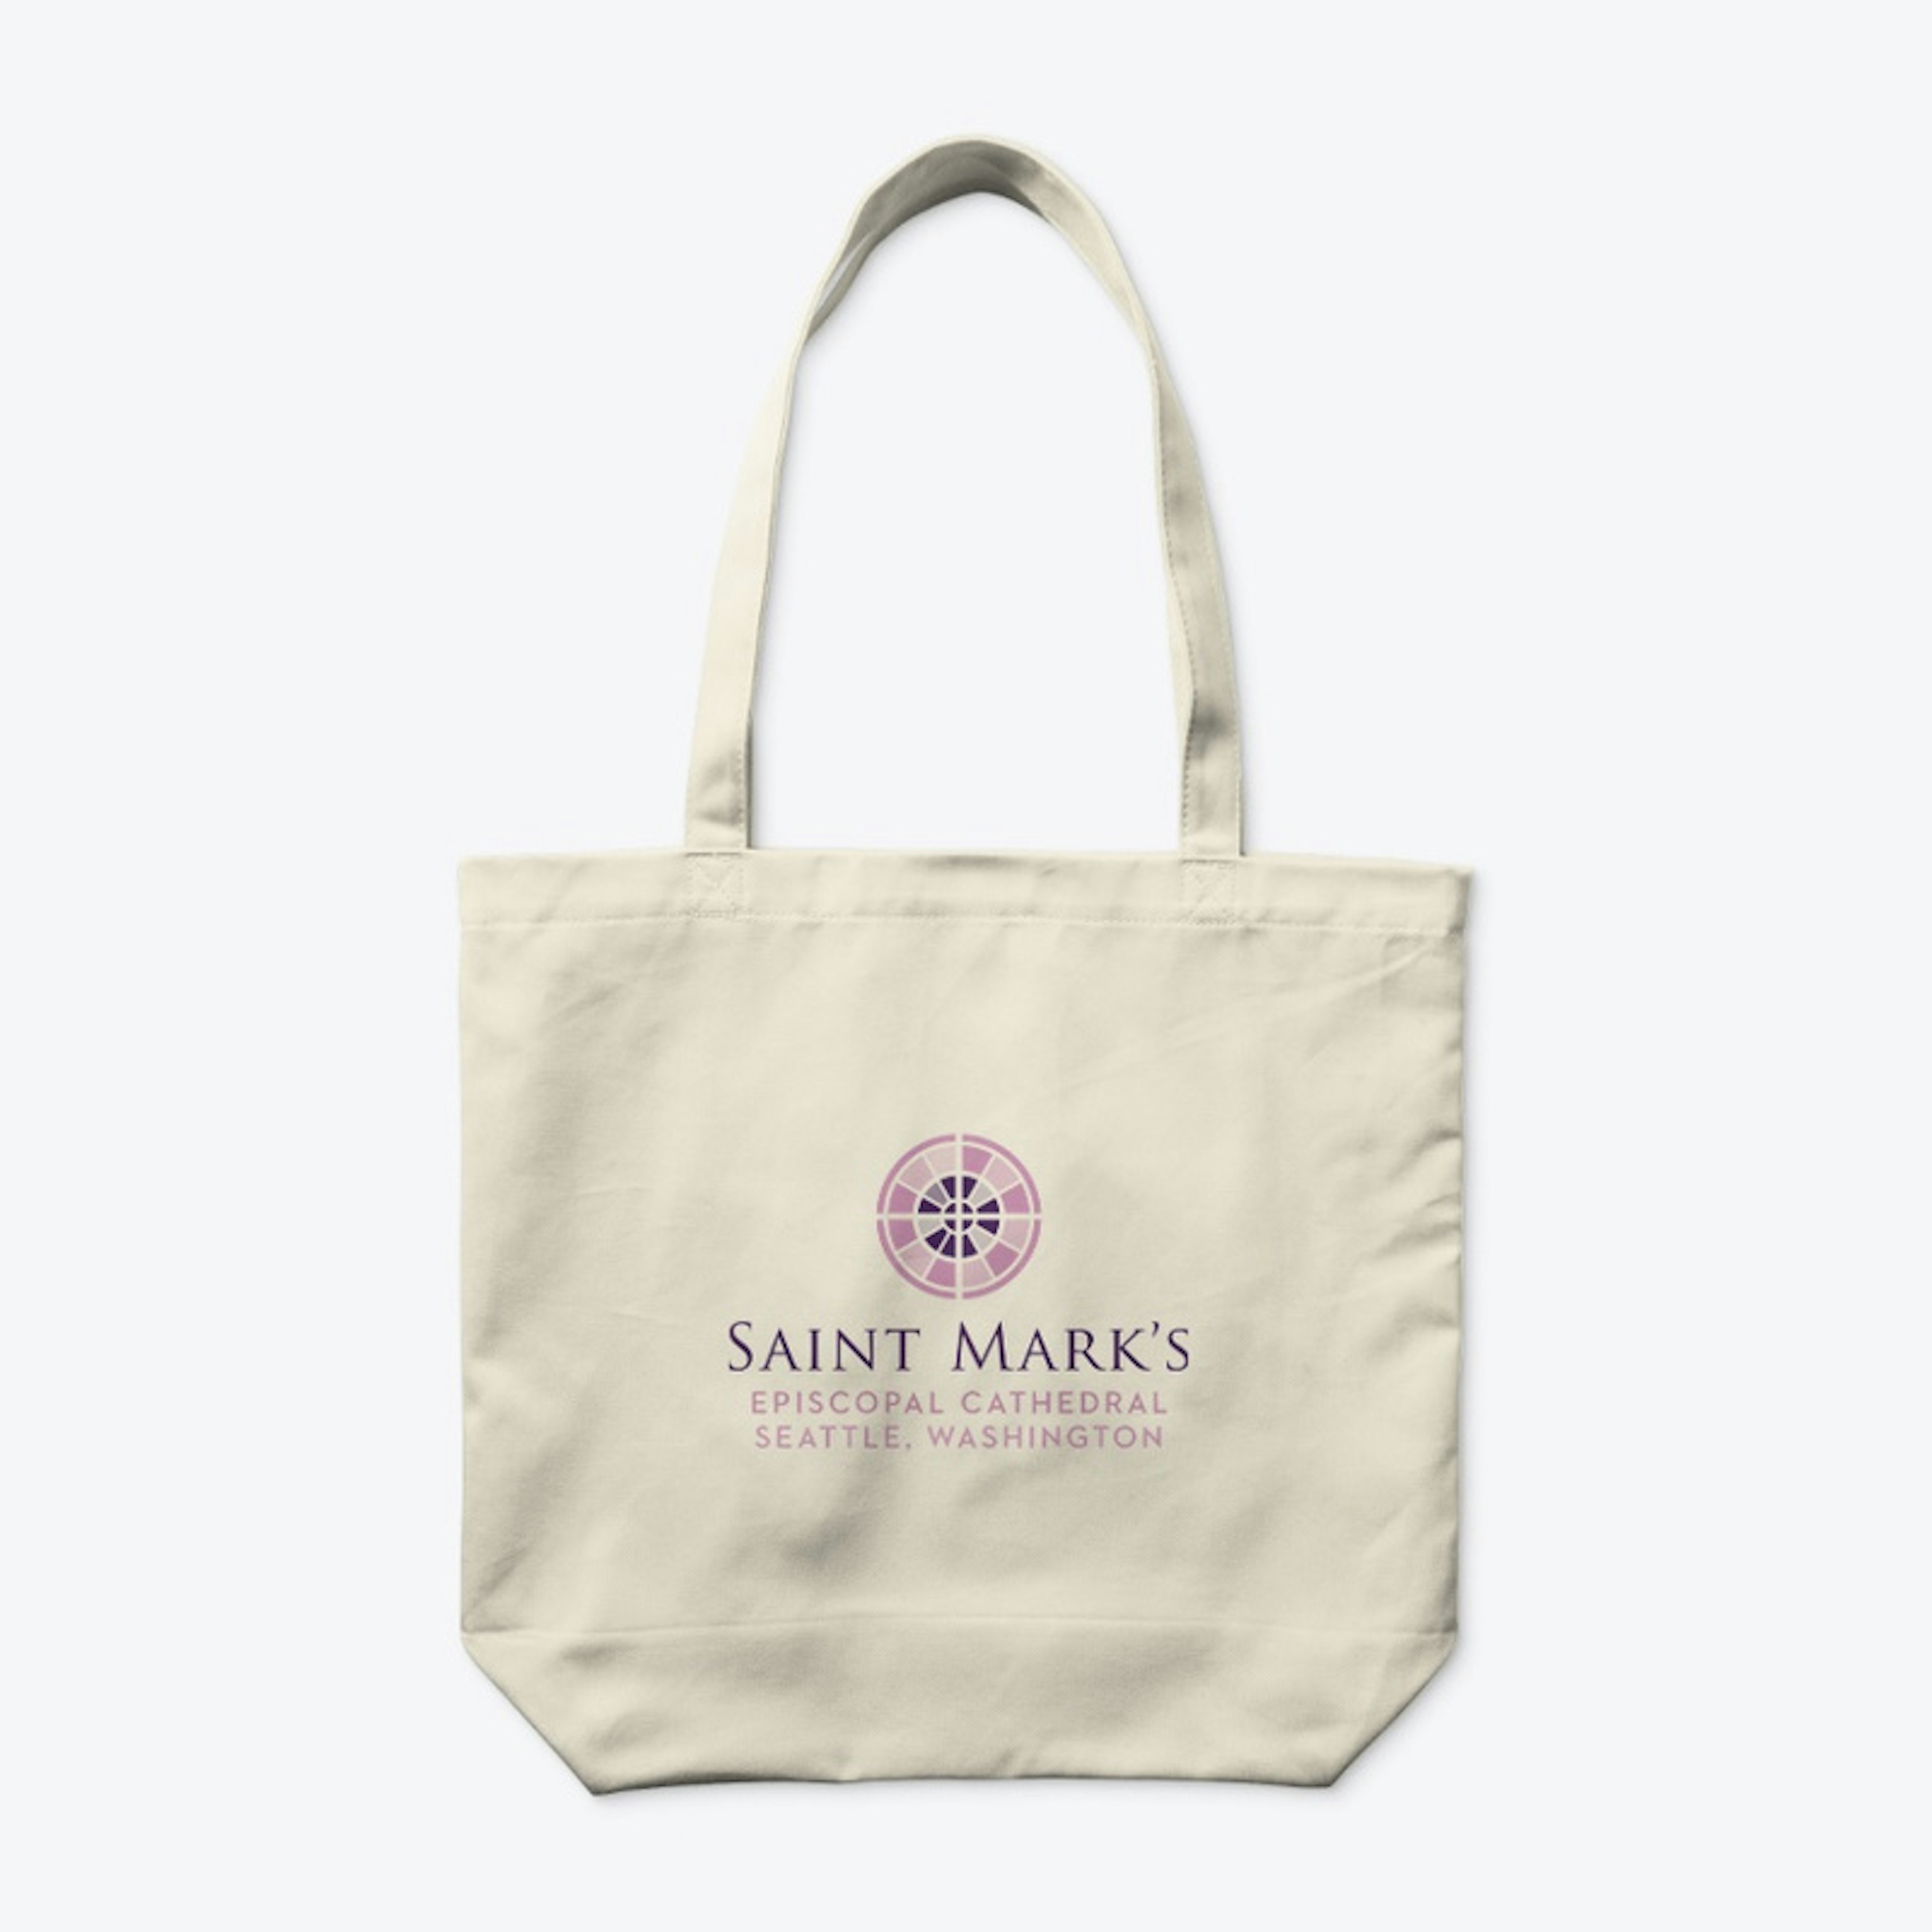 Organic cotton tote with logo